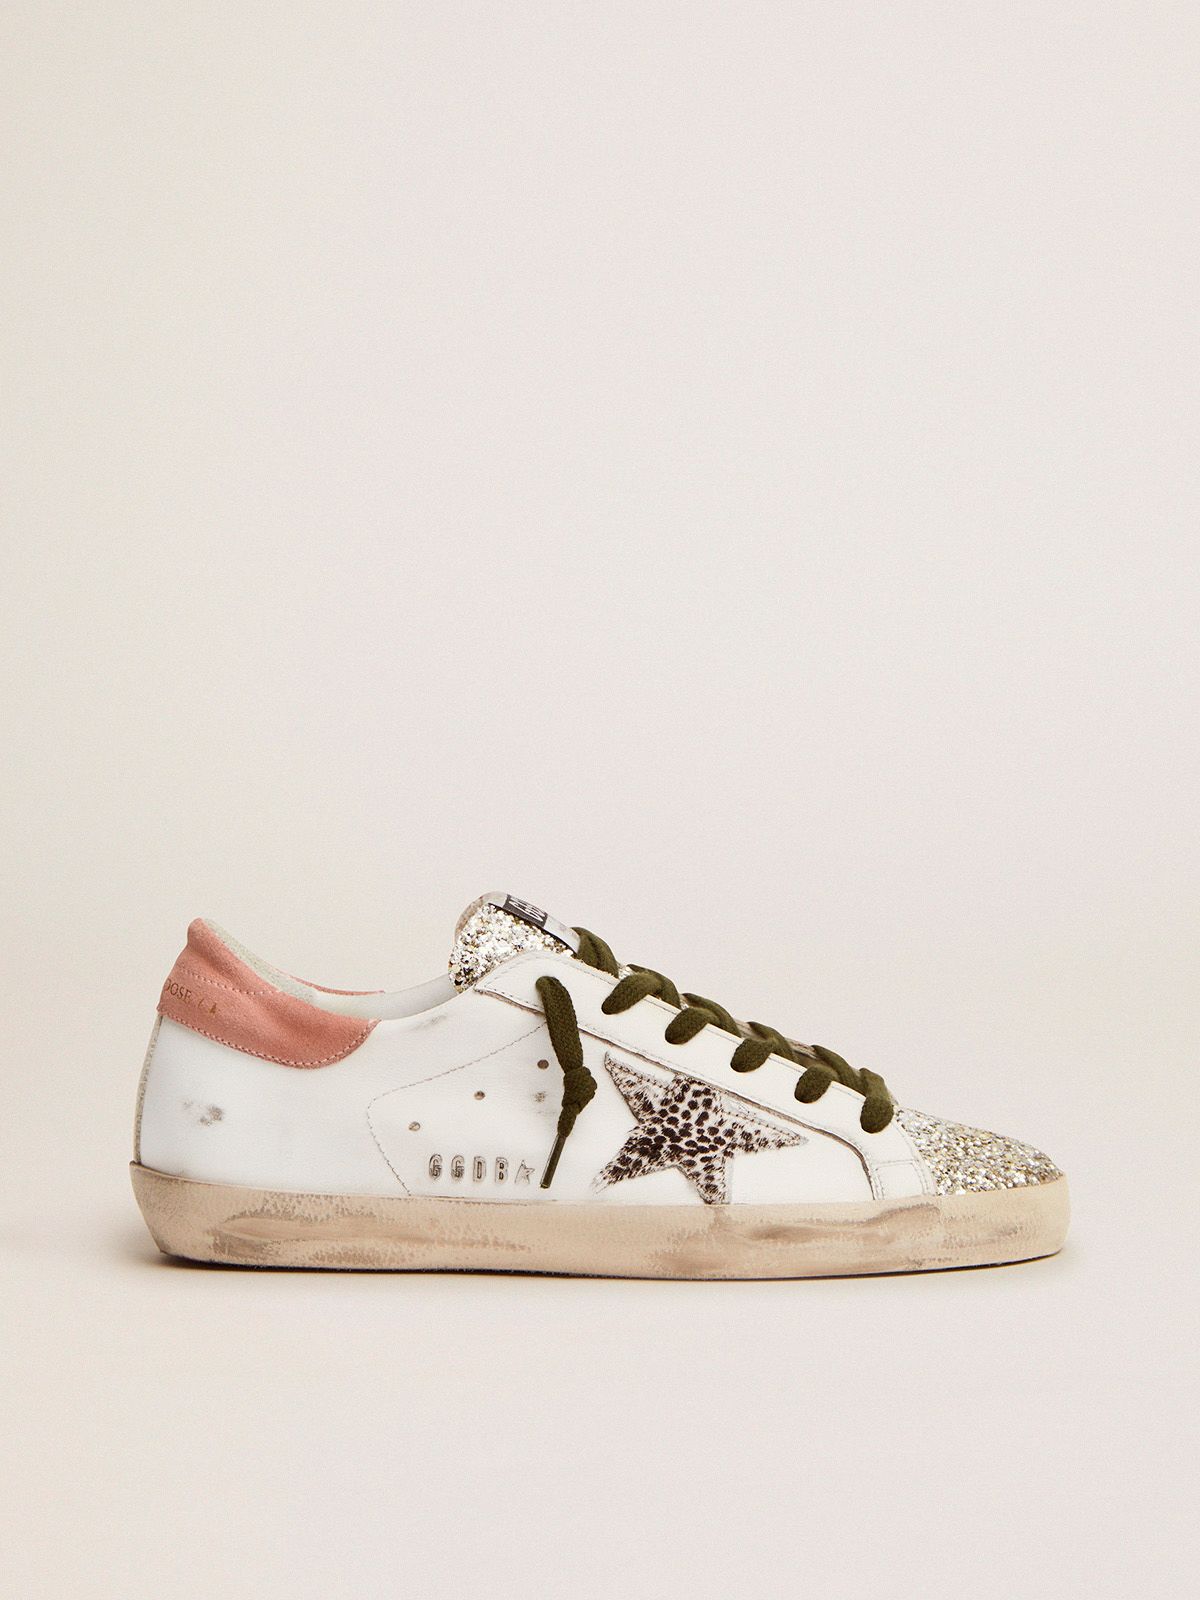 Super-Star LTD sneakers with silver glitter and animal-print pony skin star